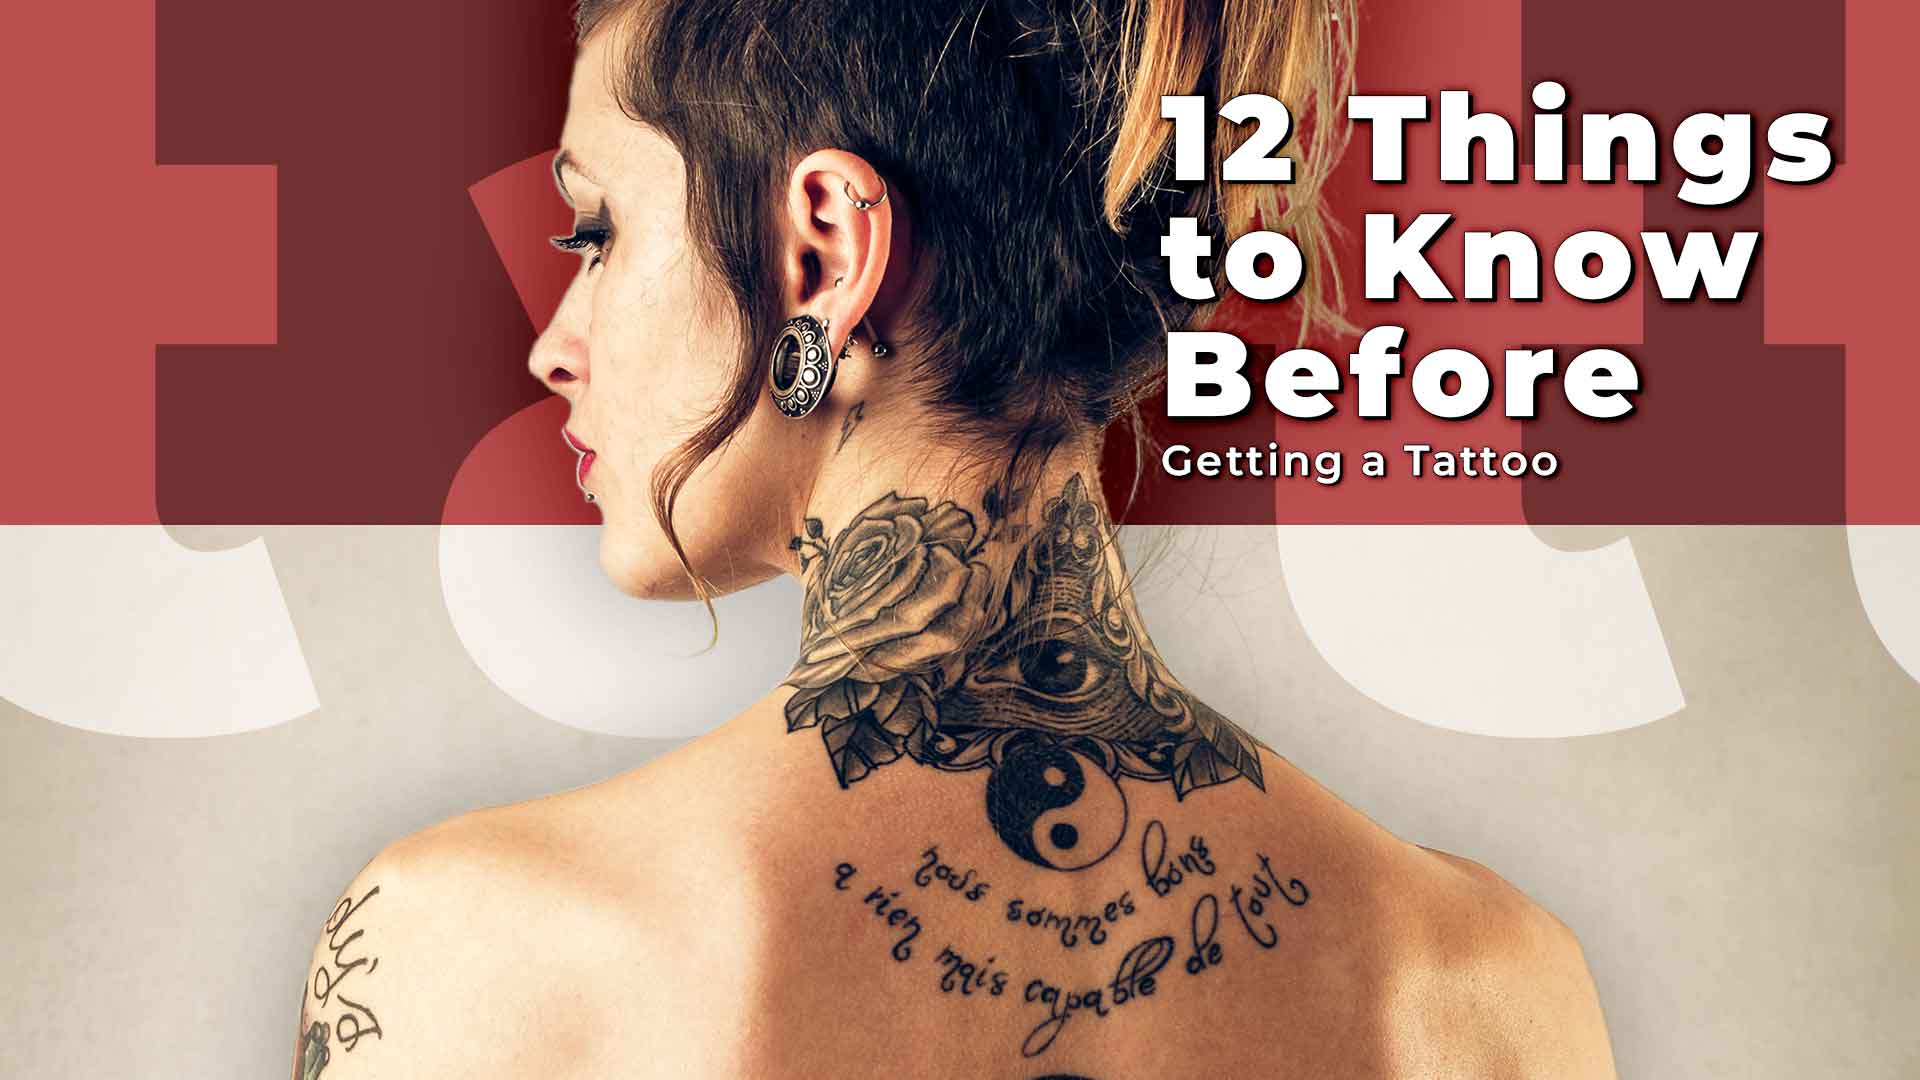 What to know before getting a tattoo